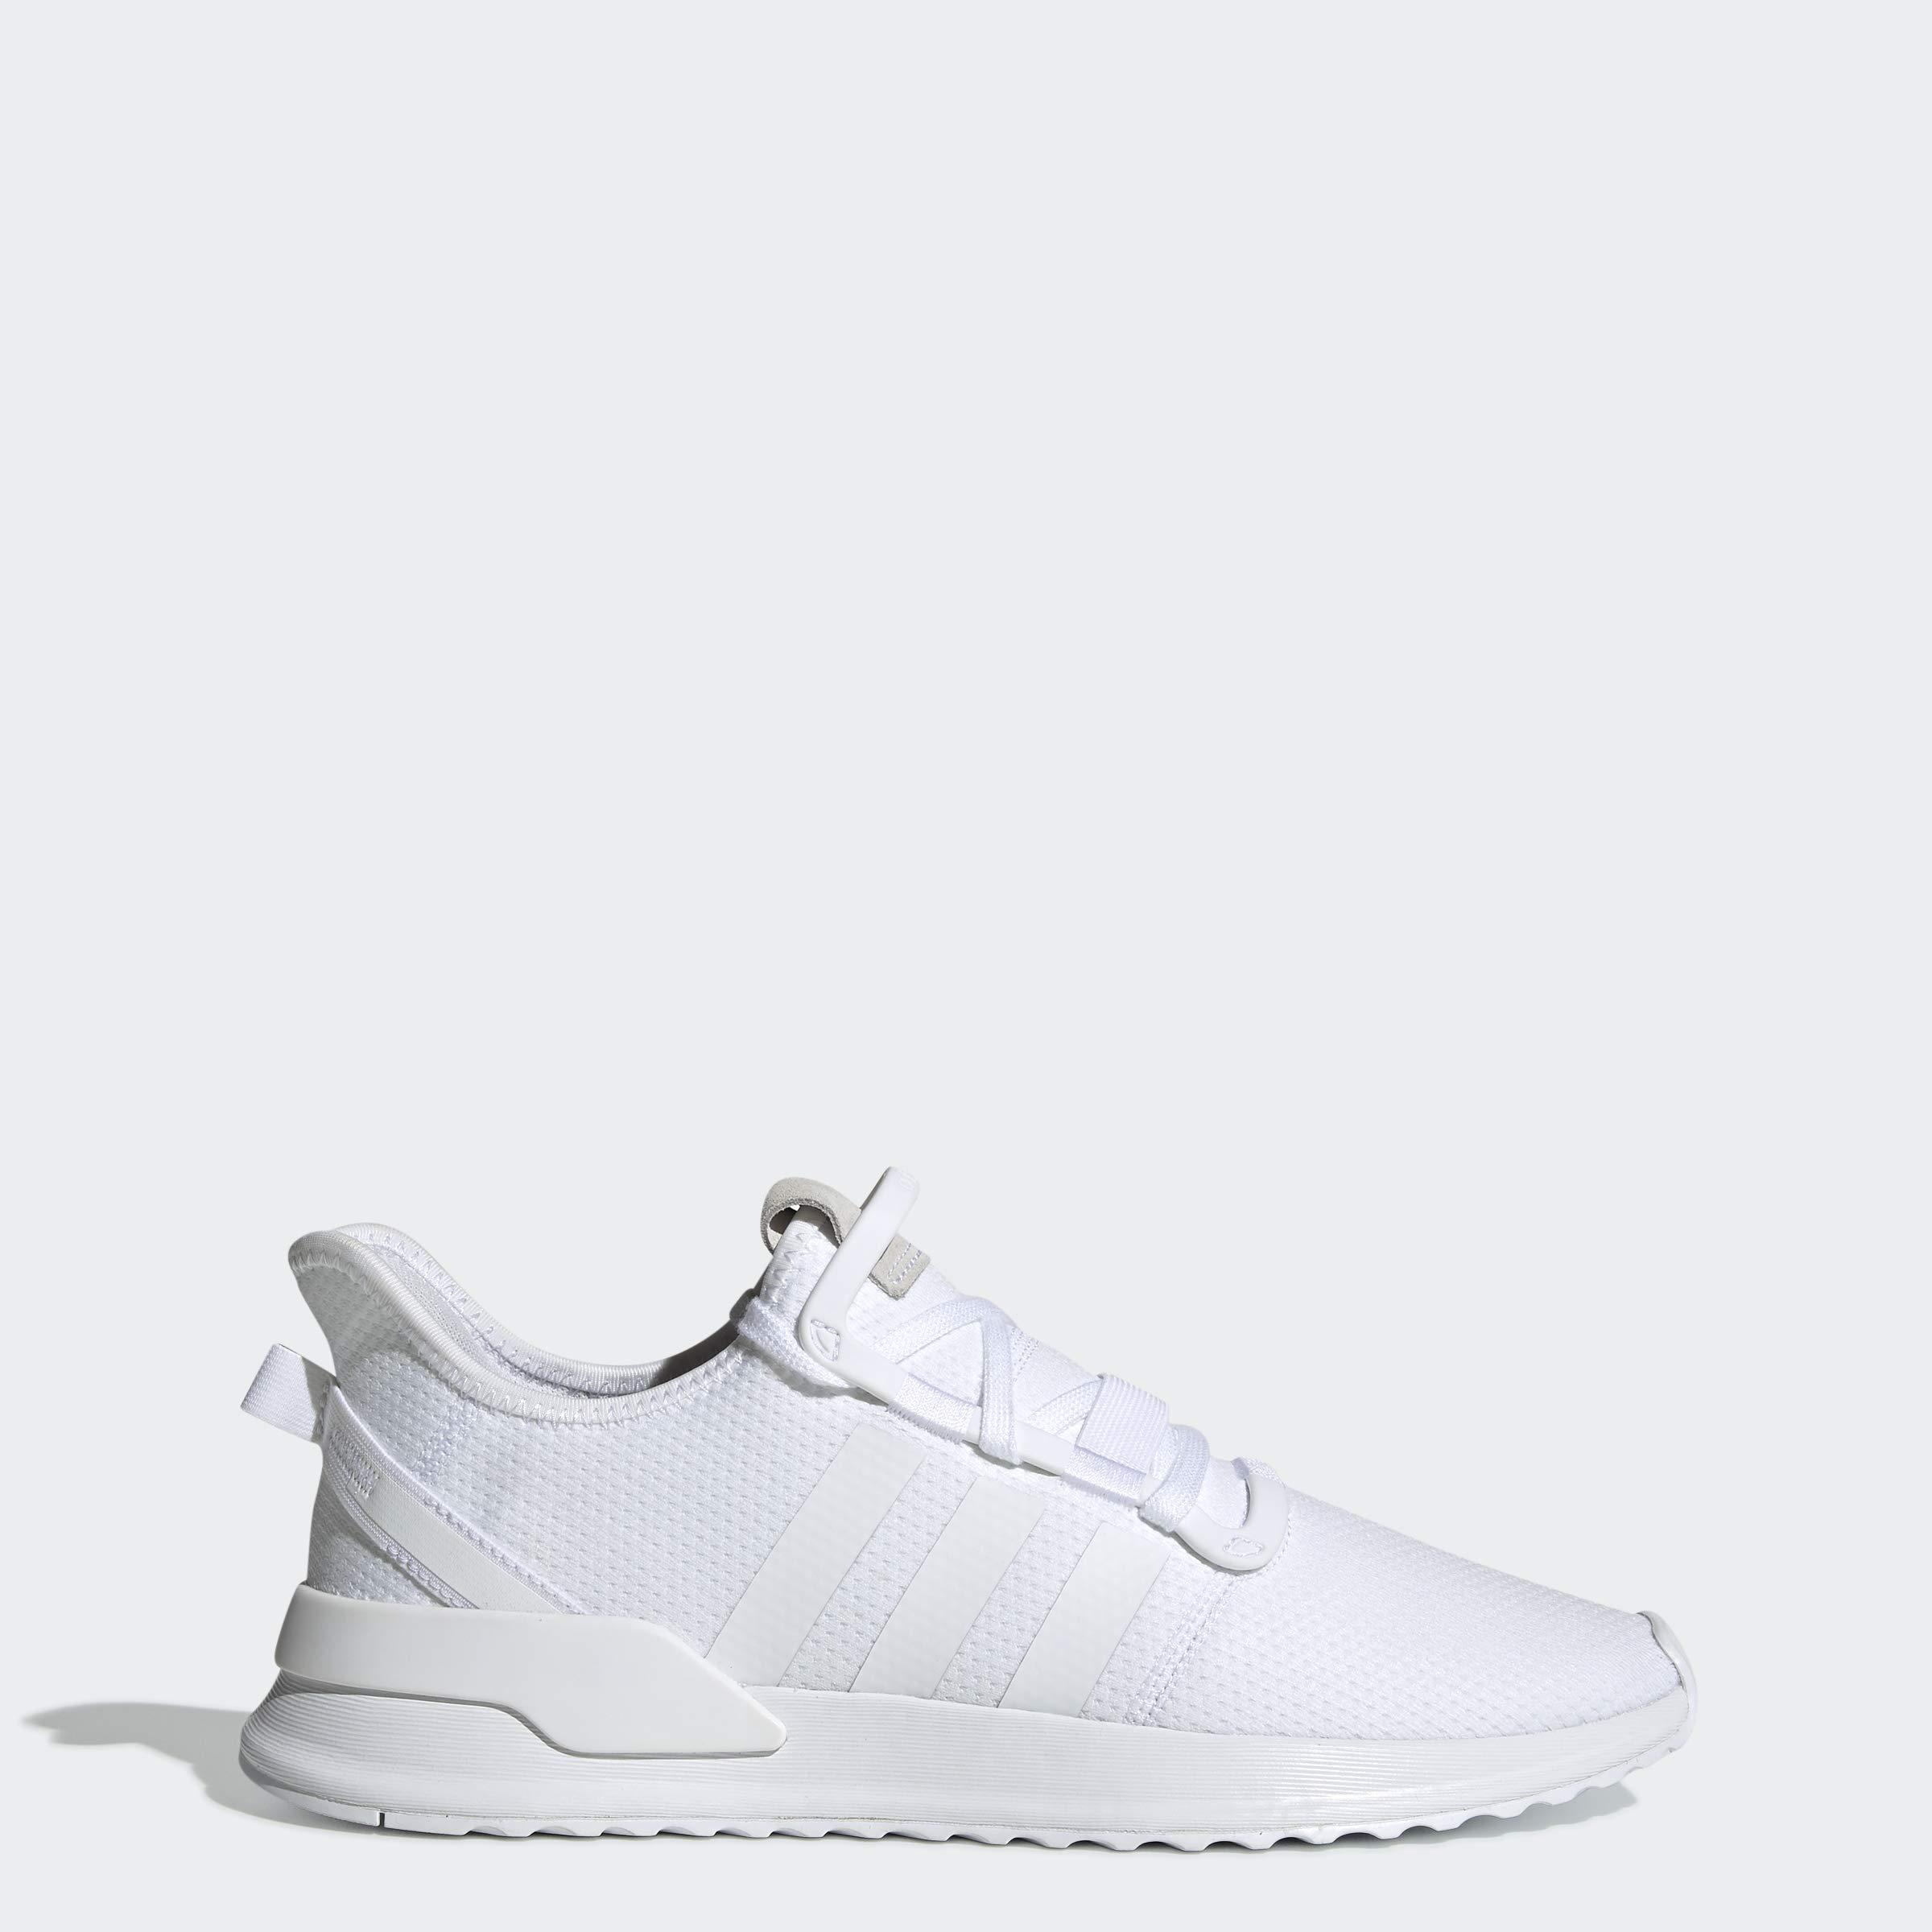 adidas Originals Rubber U_path Shoes in (White) for - Lyst